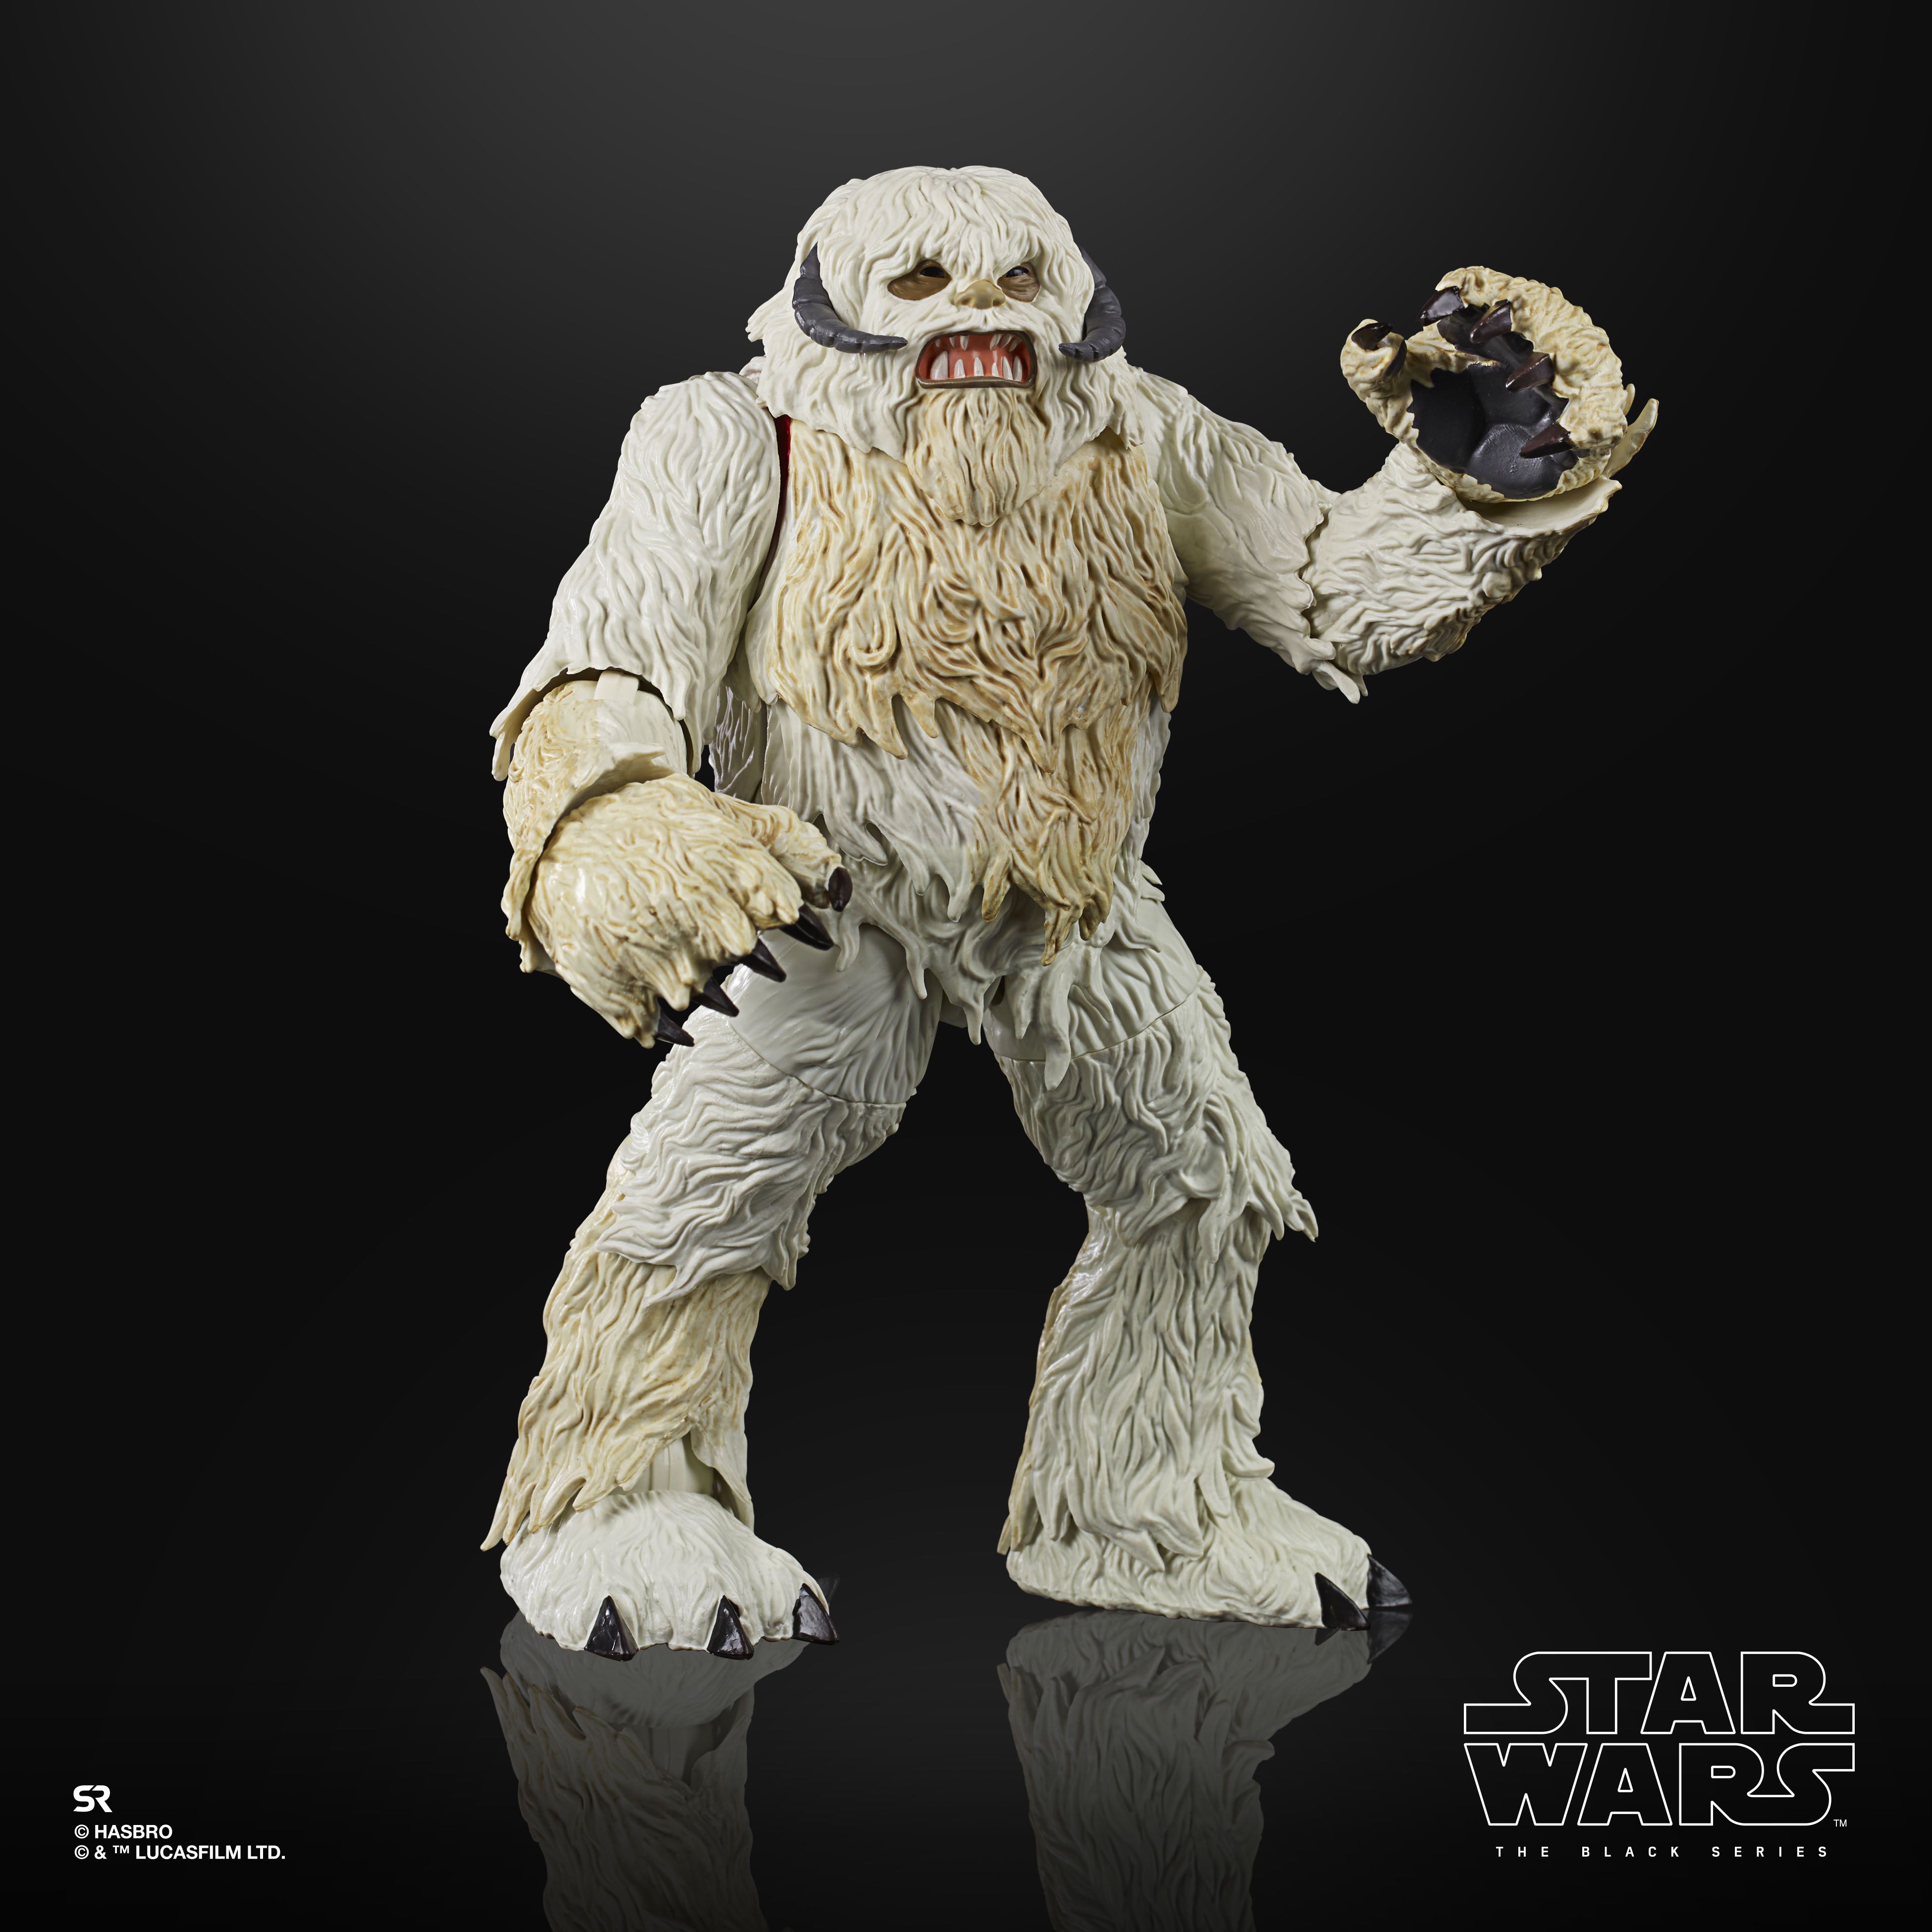 Star Wars The Black Series 6-Inch-Scale Hoth Wampa Figure - oop (Out of Packaging)